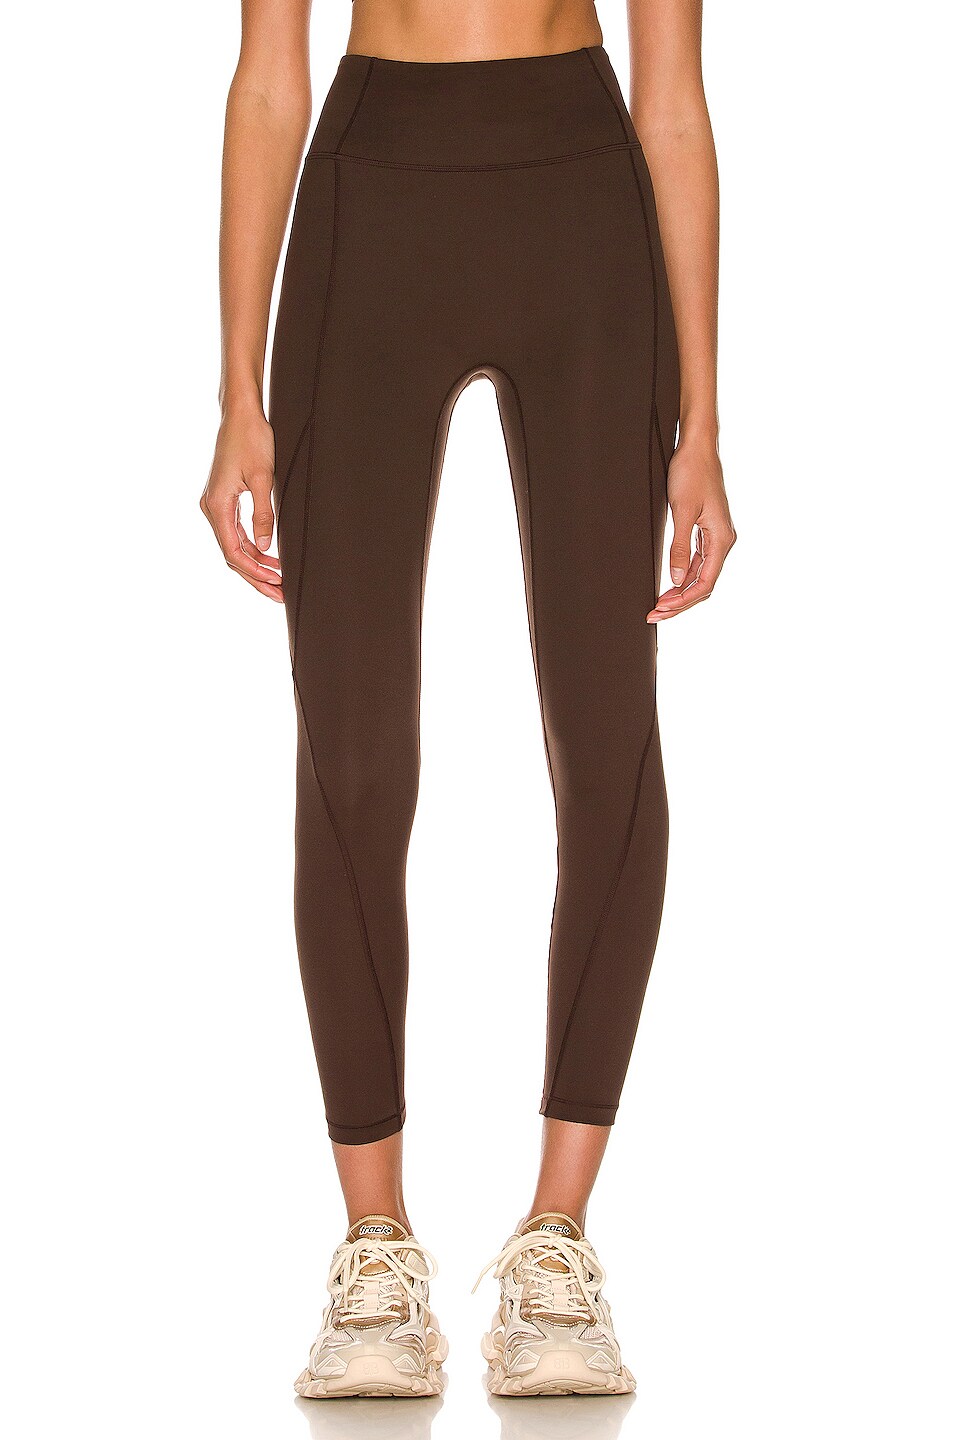 Image 1 of Le Ore Lucca High Rise Legging in Chocolate